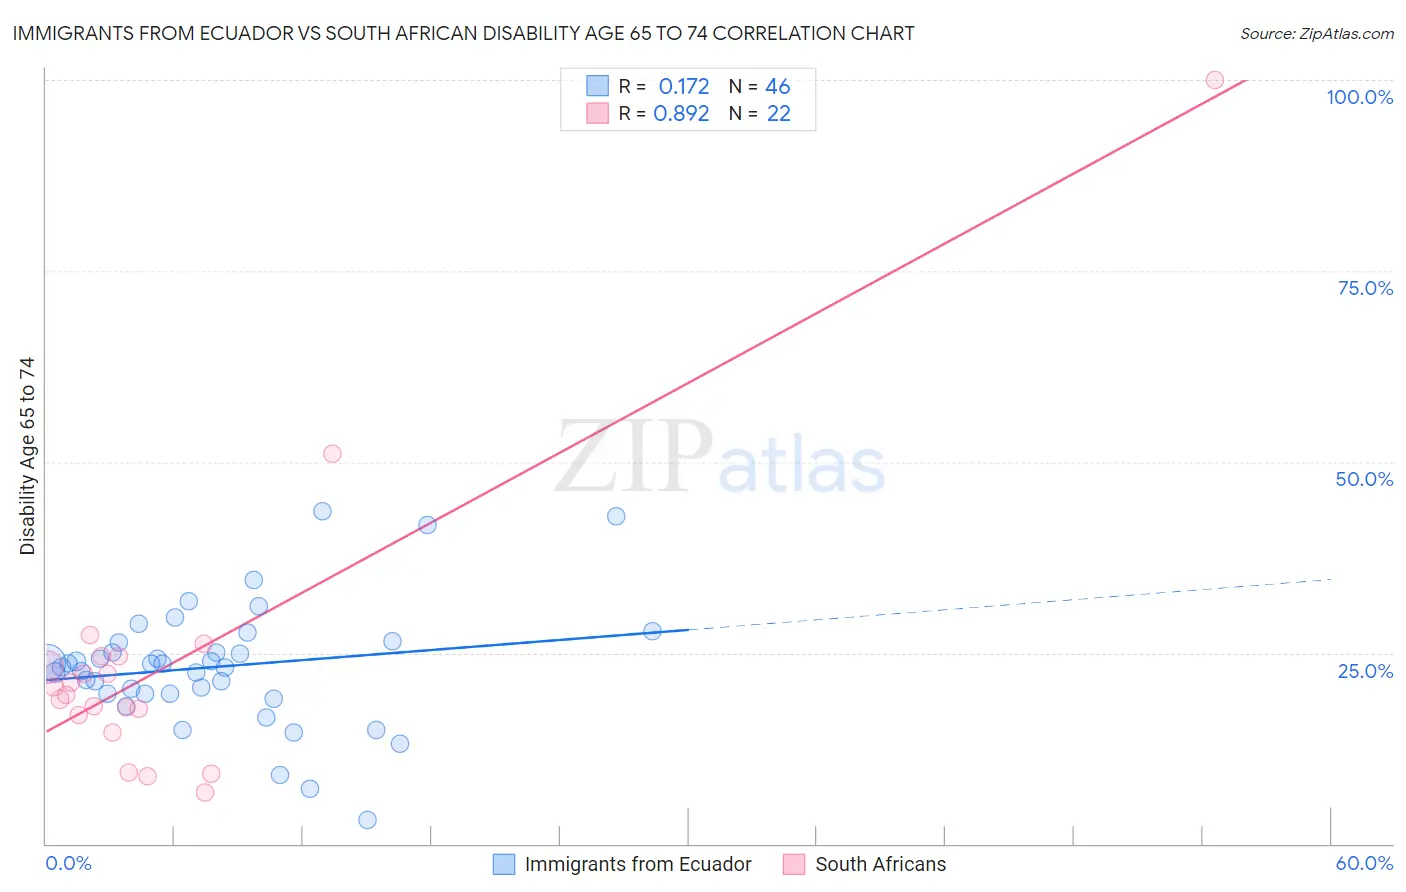 Immigrants from Ecuador vs South African Disability Age 65 to 74